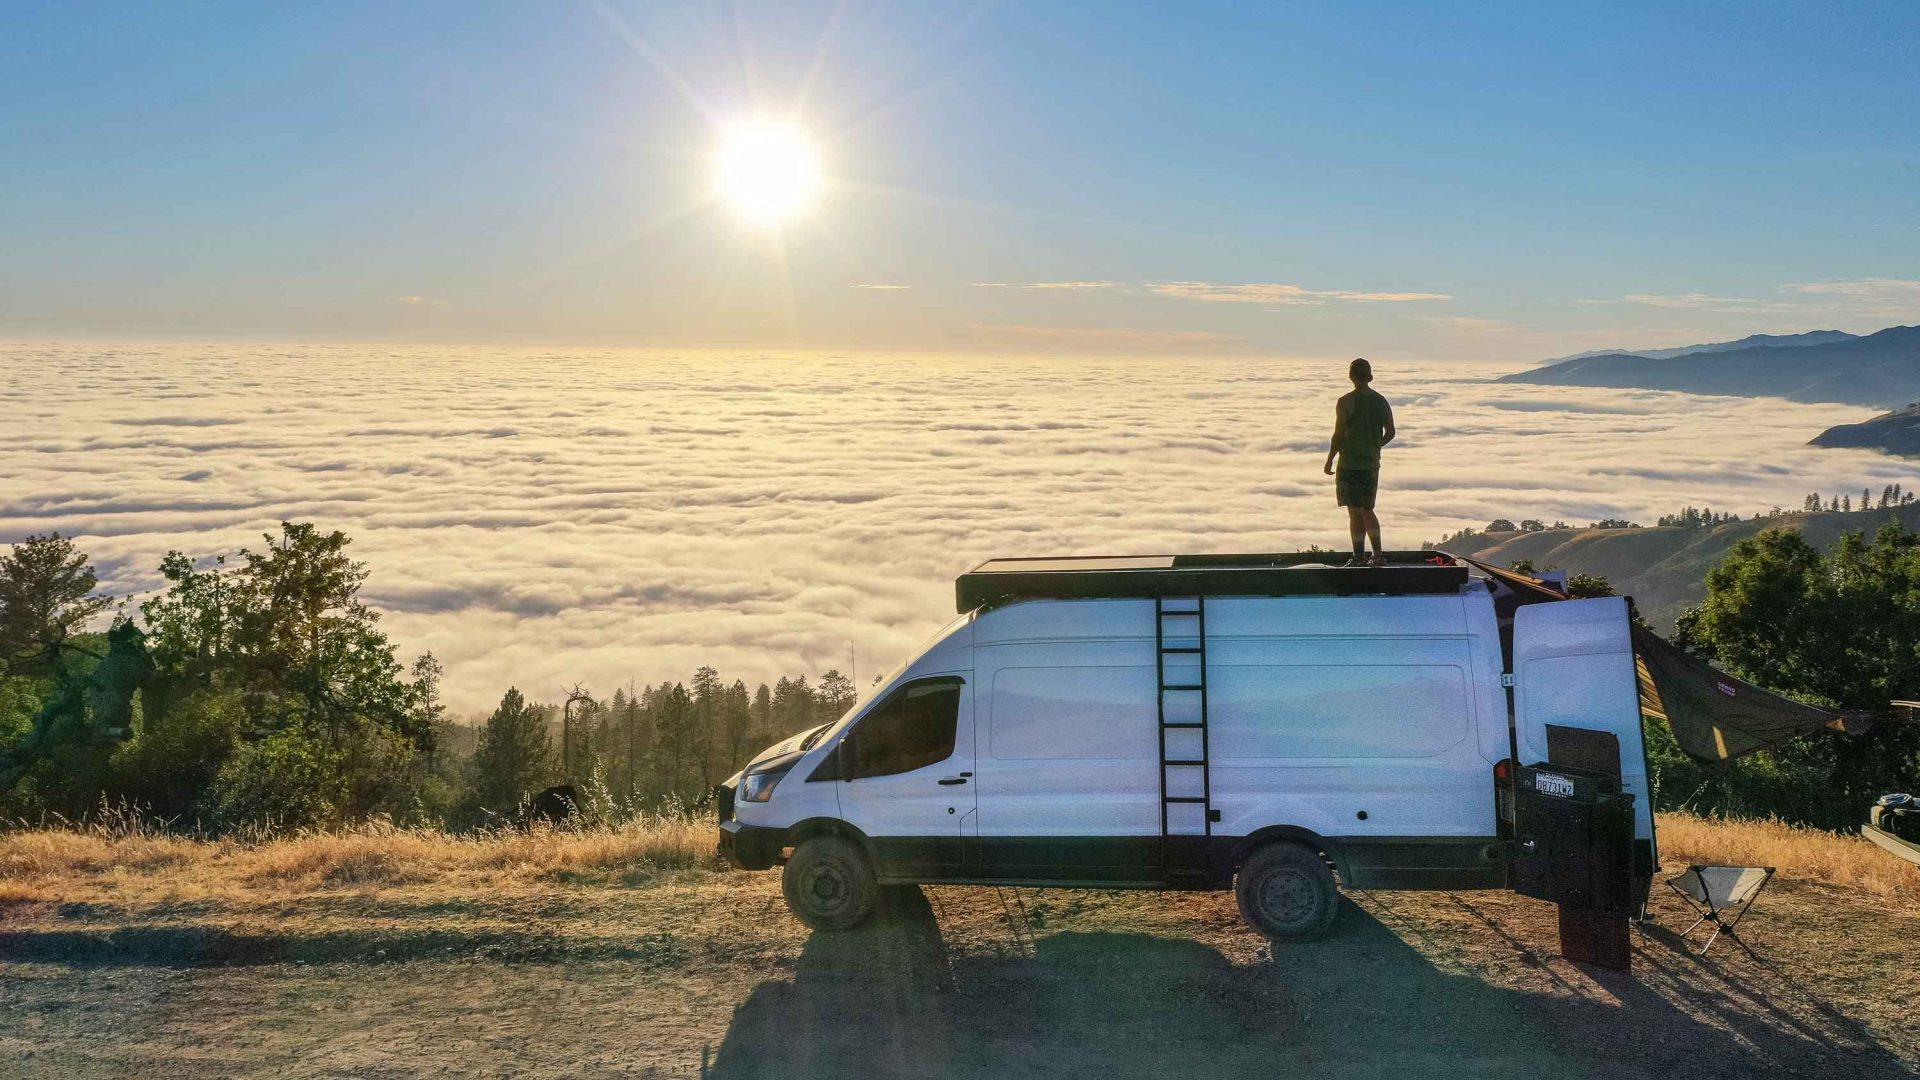 Why some people choose to live the nomadic van lifestyle